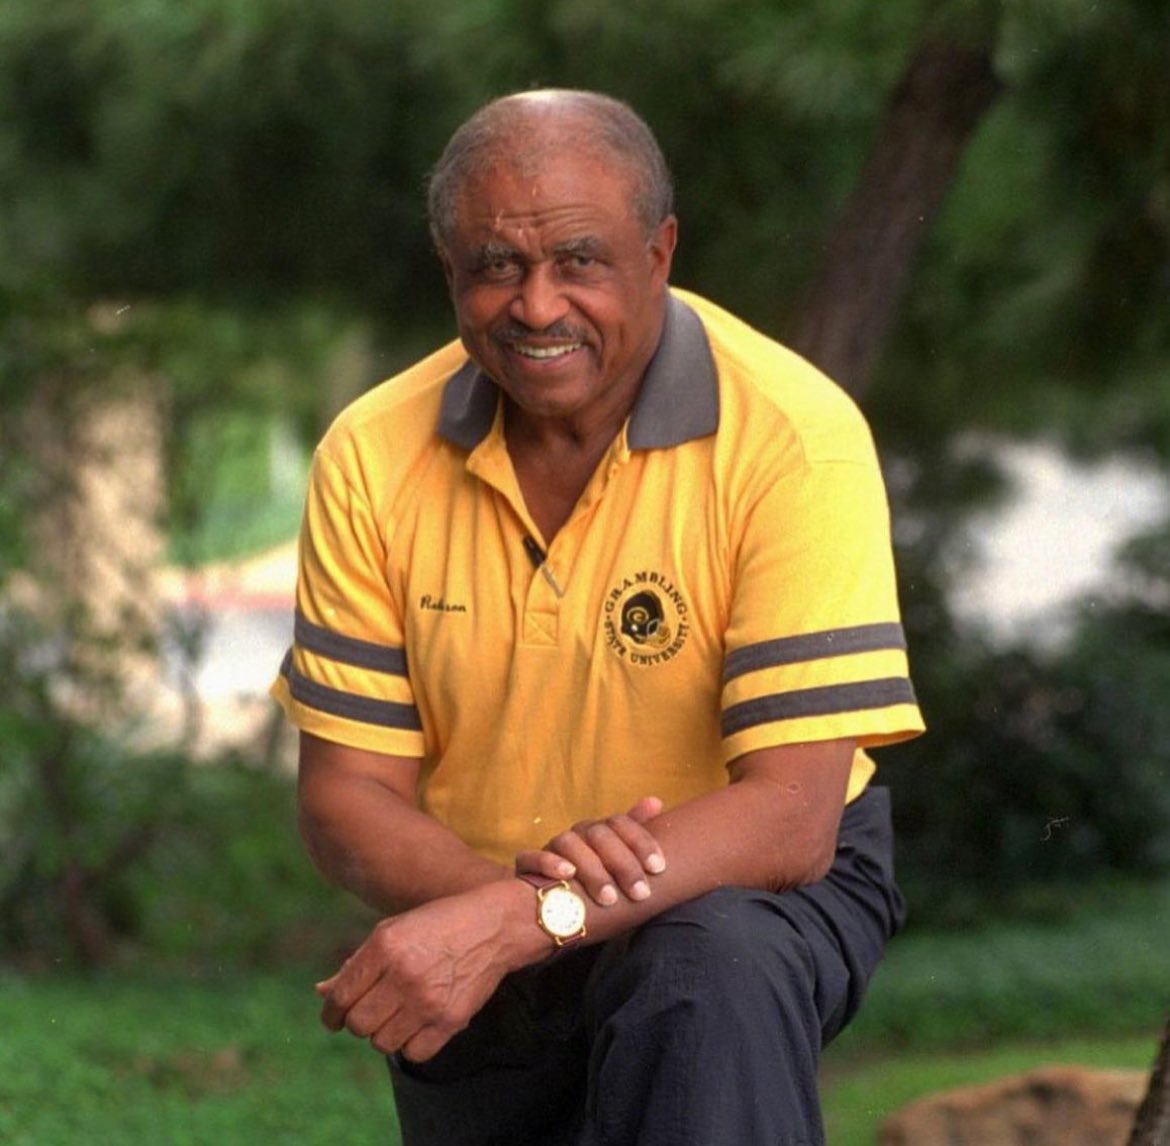 Happy Heavenly Birthday to Legendary Coach Eddie Robinson * Coach Robinson won 408 games at Grambling, the College Football Hall of Fame inductee saw more than 200 of his athletes play in the NFL